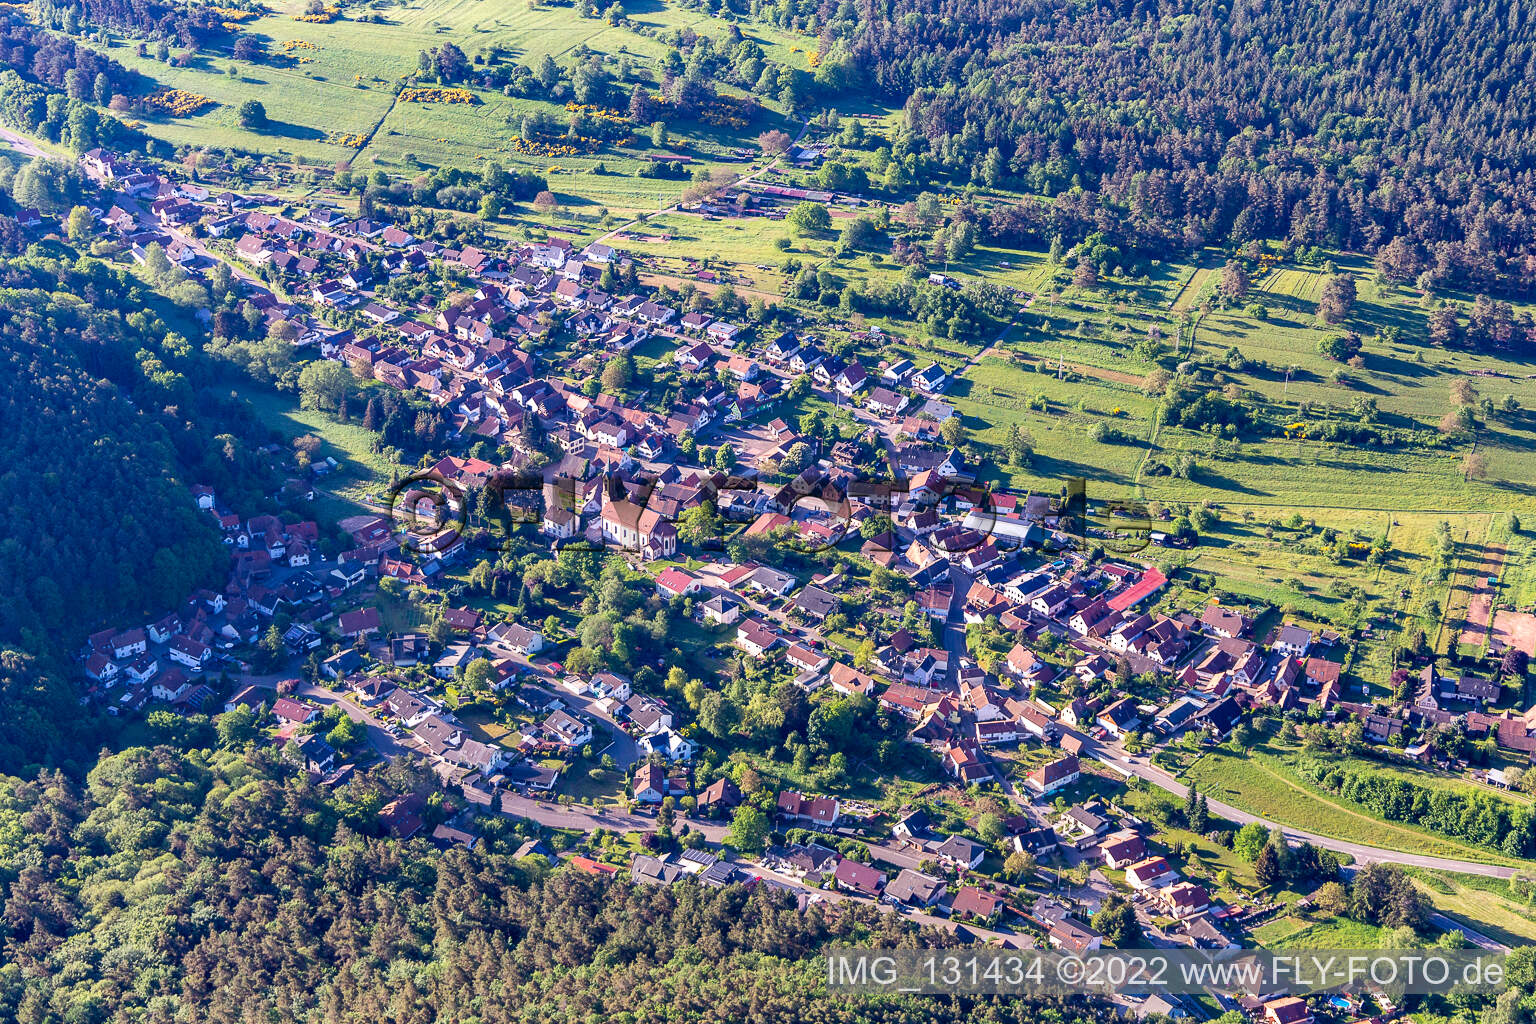 Birkenhördt in the state Rhineland-Palatinate, Germany from the drone perspective